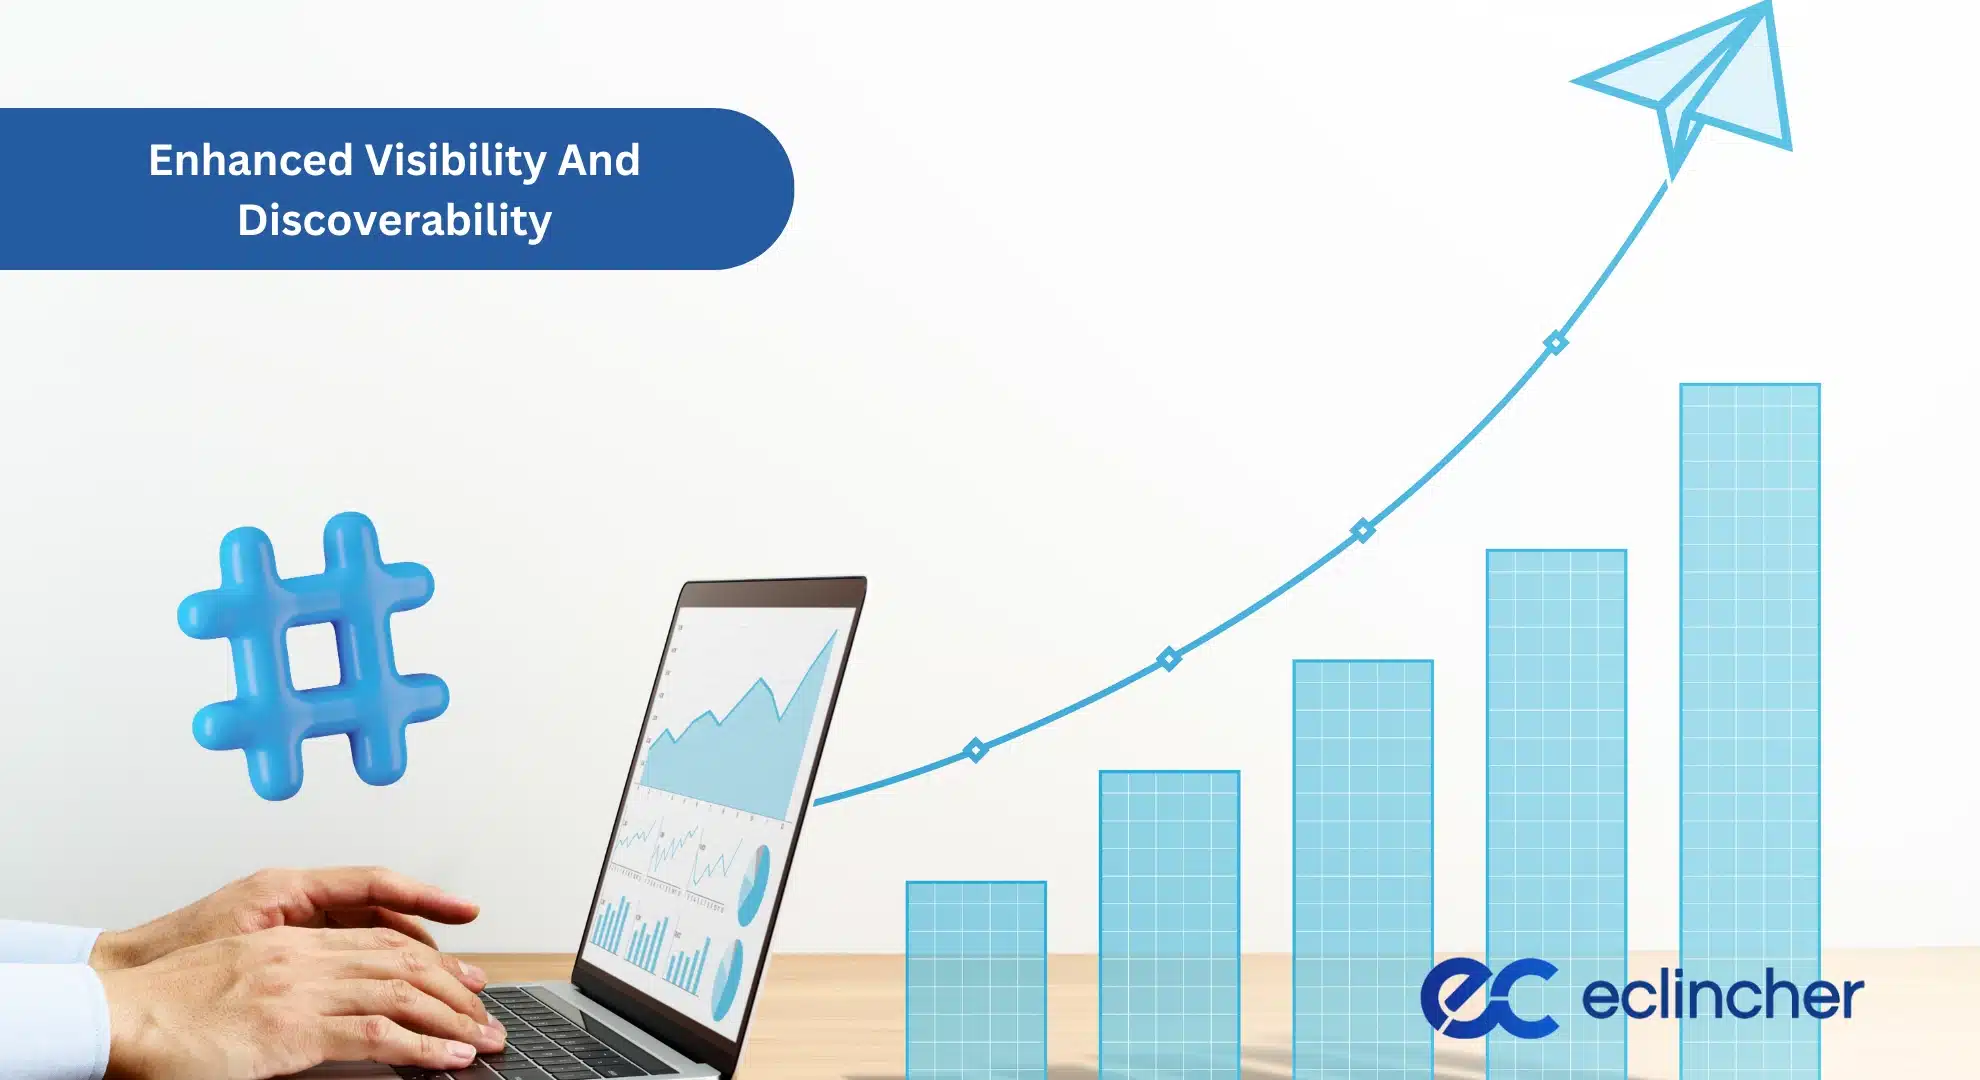 Enhanced Visibility And Discoverability